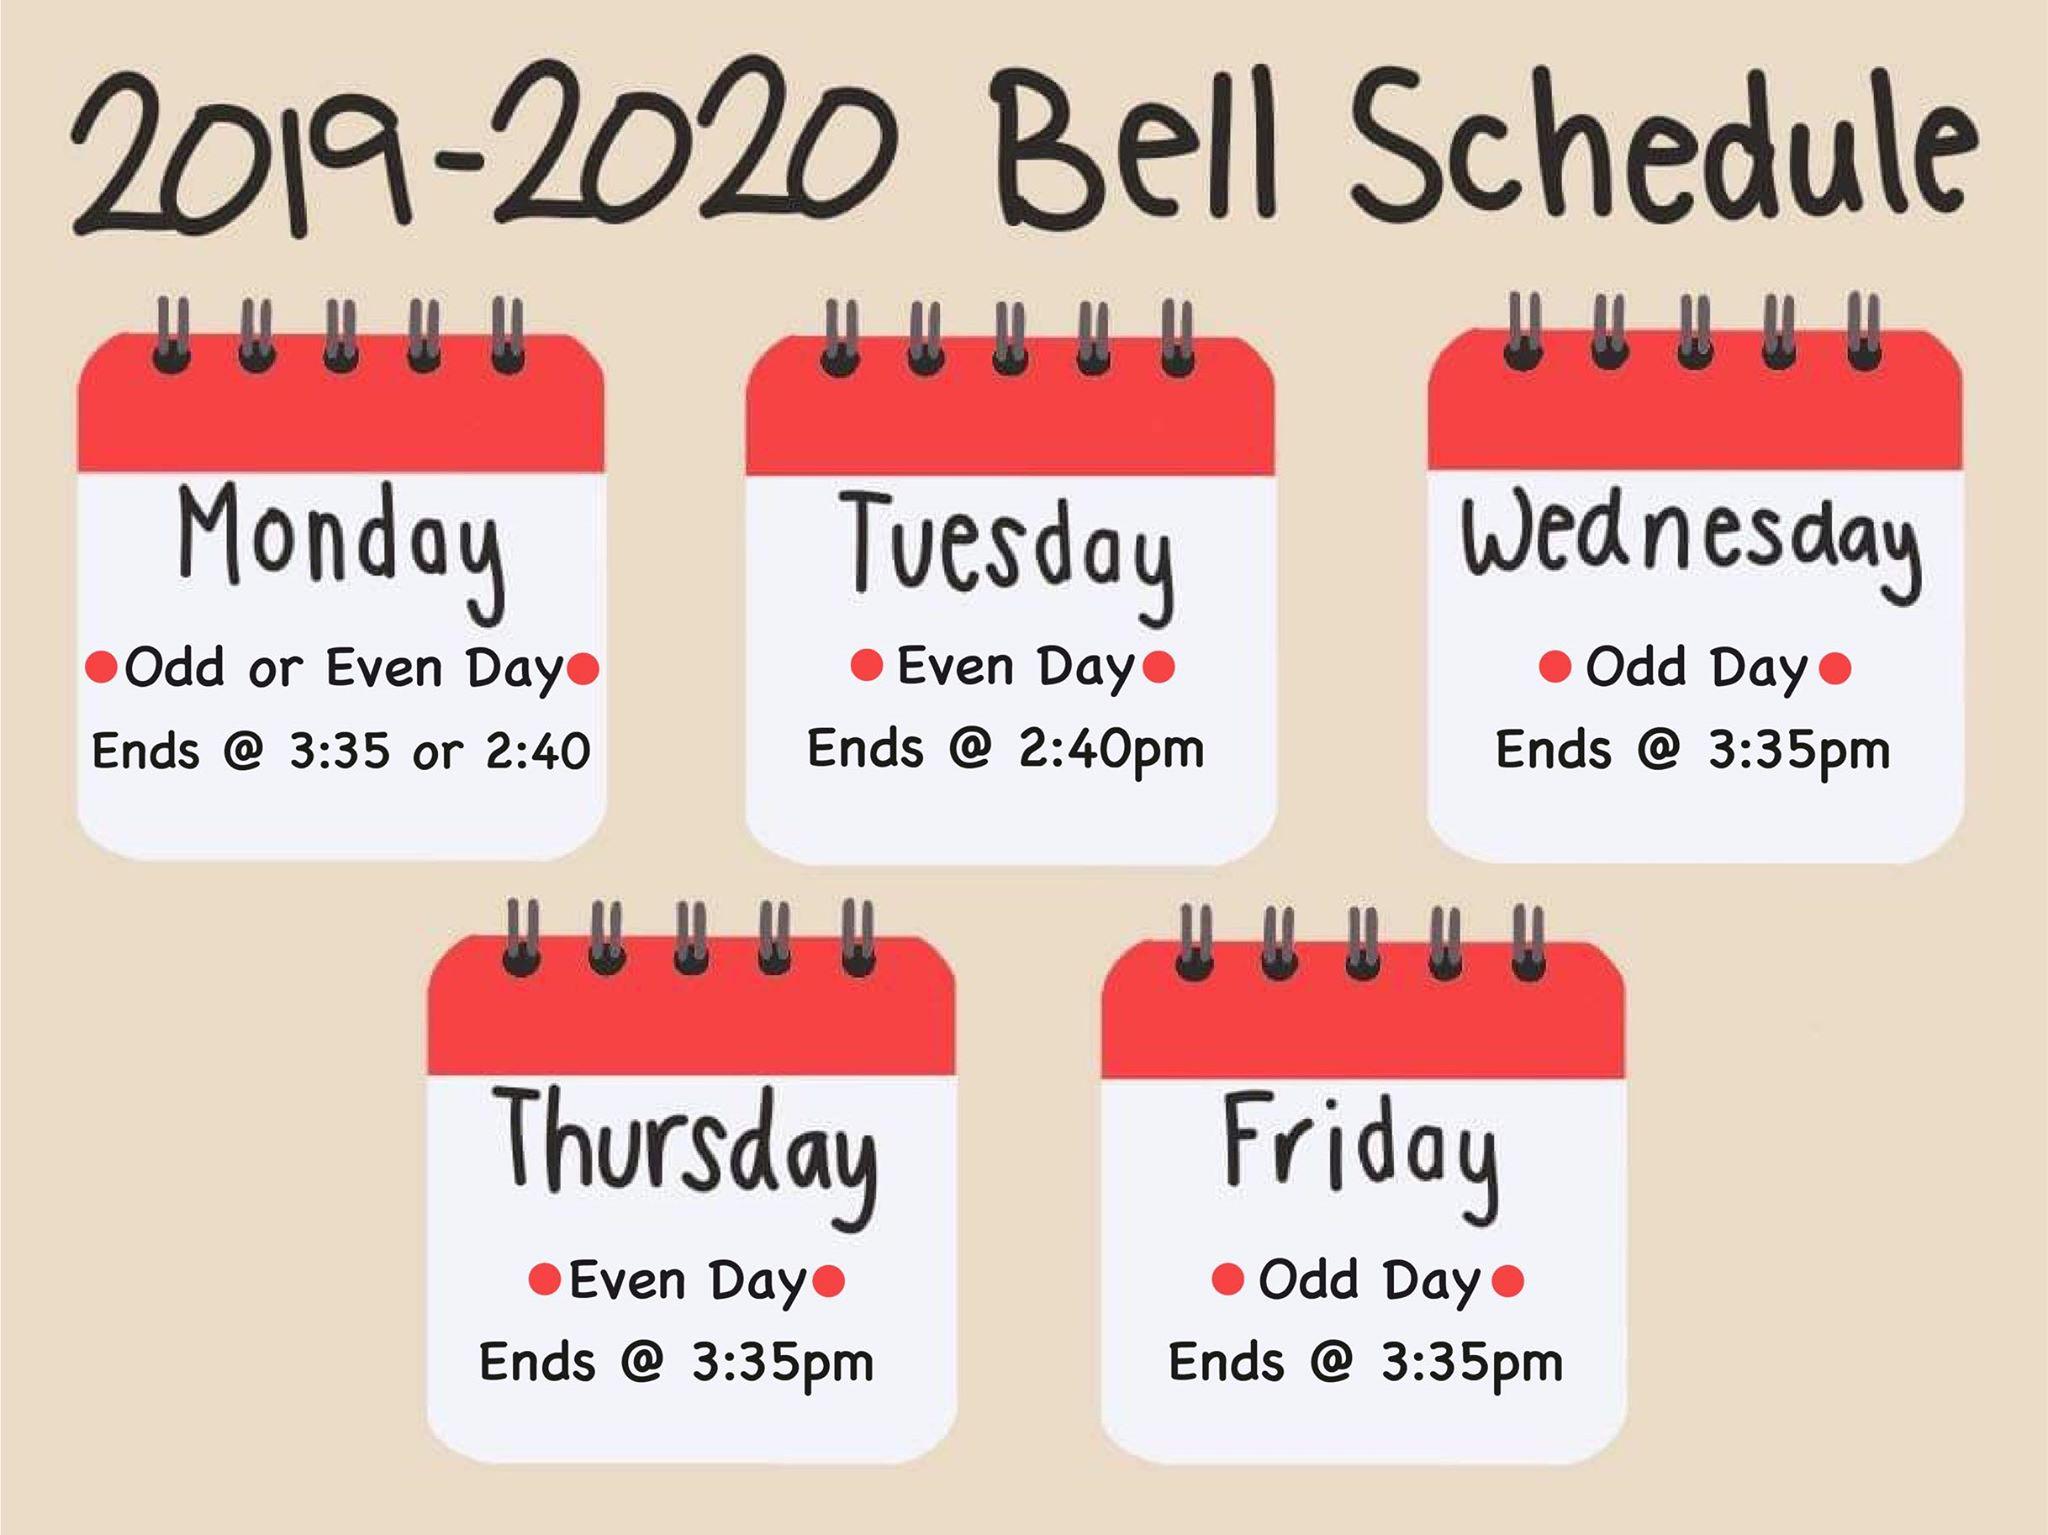 Mixed feelings over new bell schedule